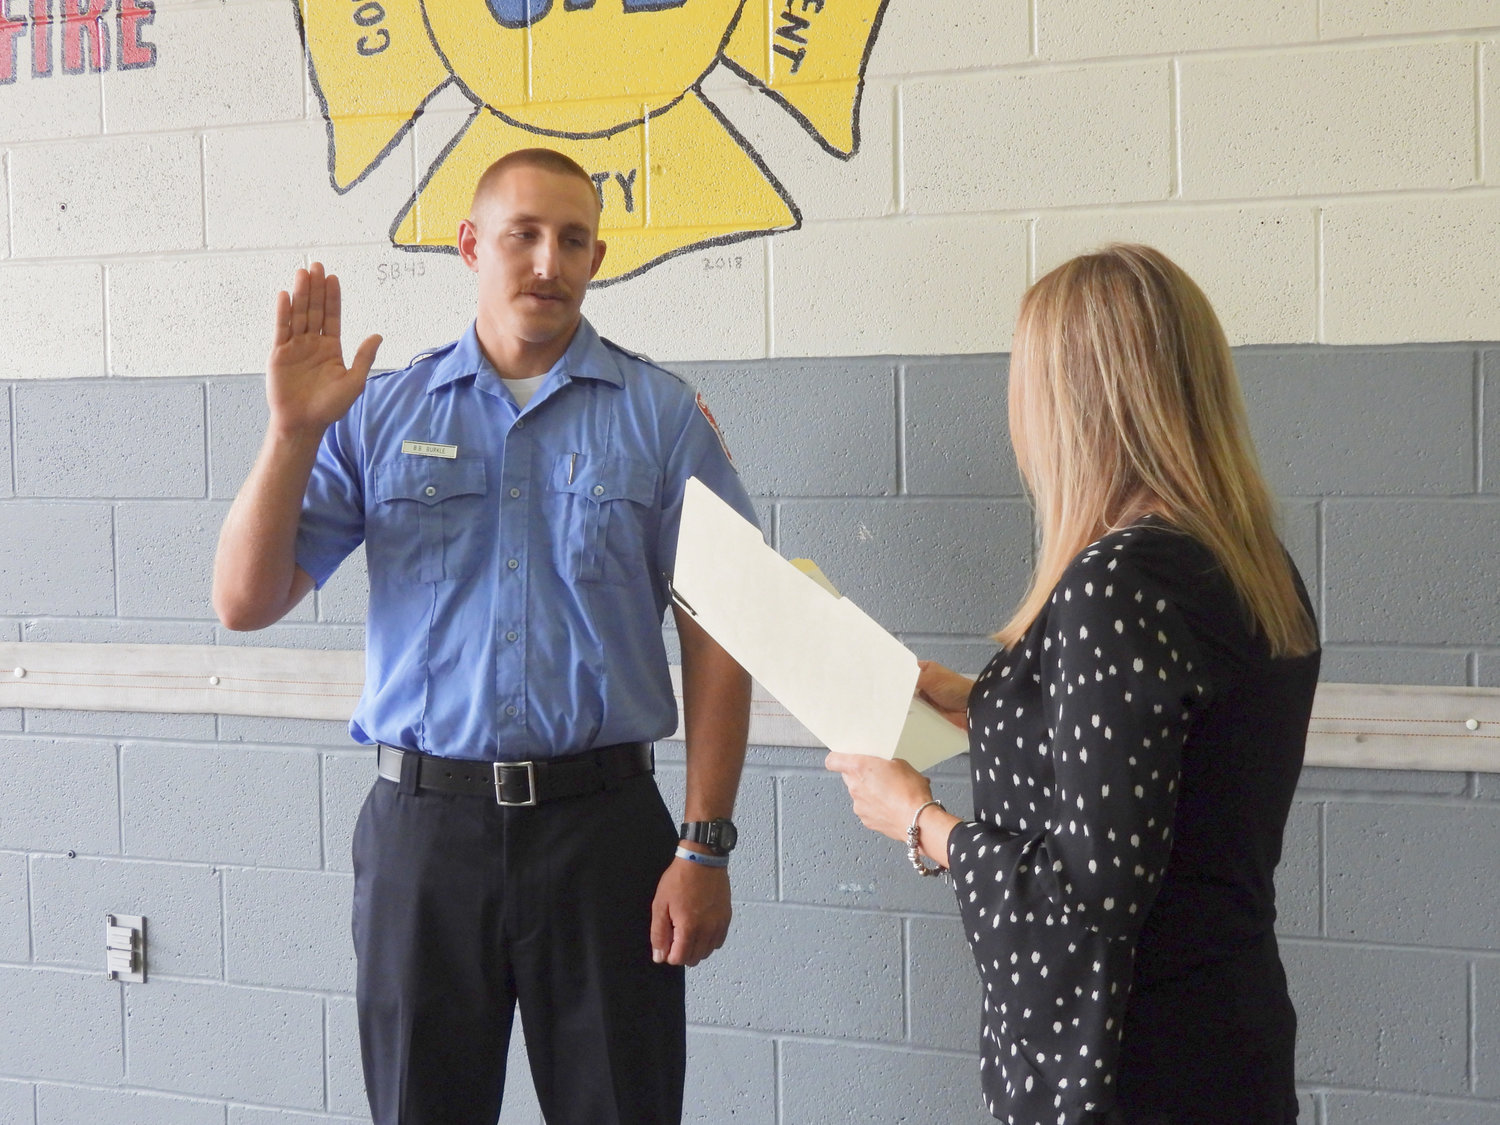 Brian Burkle is sworn in as lieutenant at the Oneida Fire Department at a ceremony on Friday, Aug. 26.